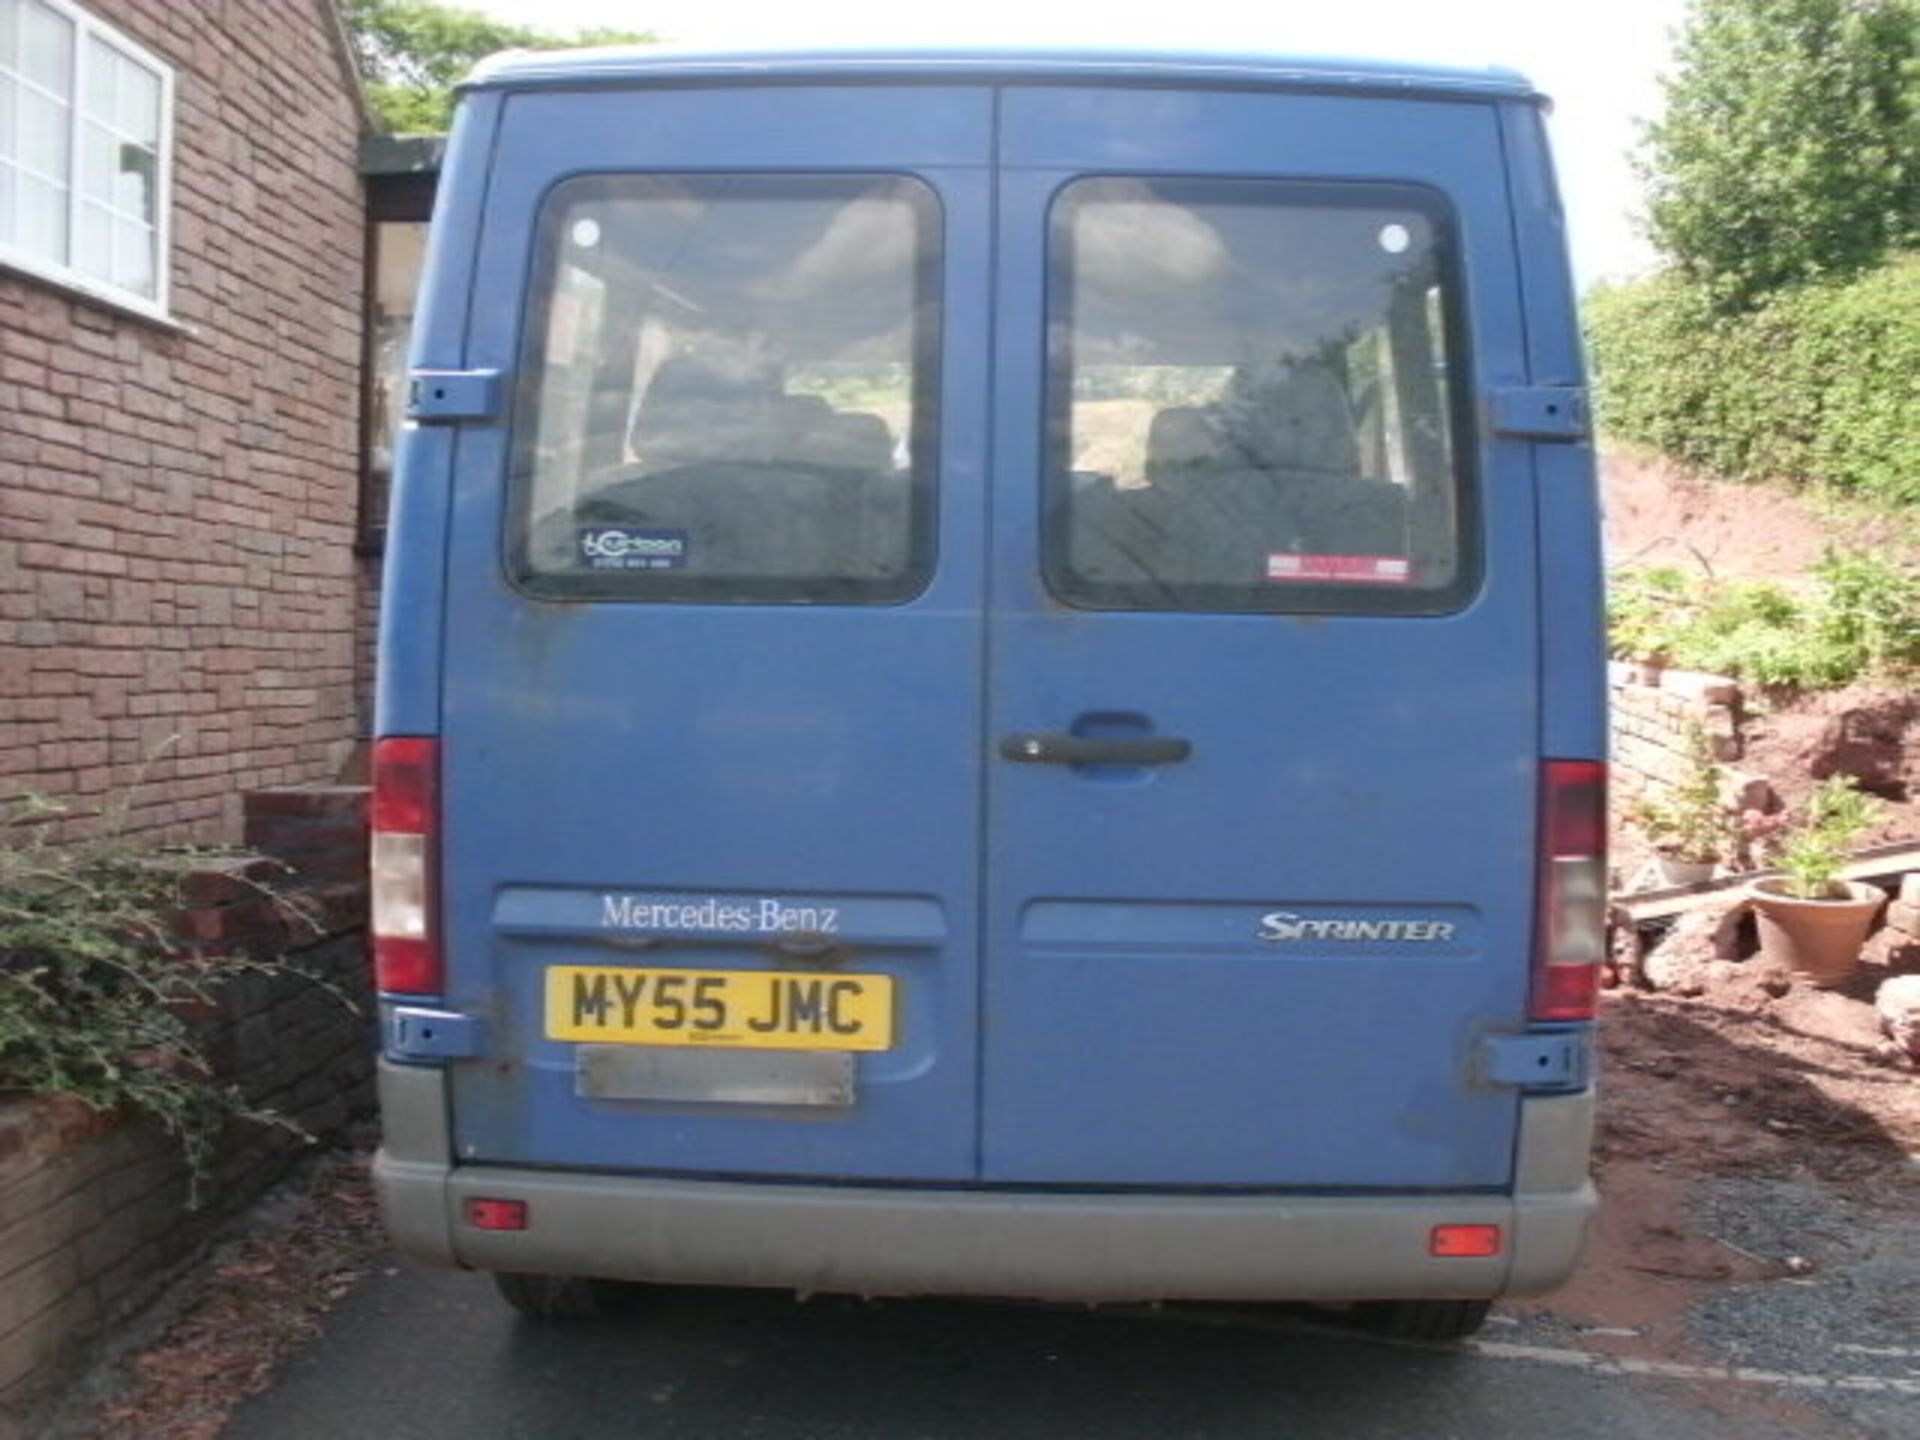 2005 (March) MERCEDES SPRINTER 211 Cdi SWB 9 seater MINI BUS including driver, blue, diesel, 2148cc, - Image 4 of 4